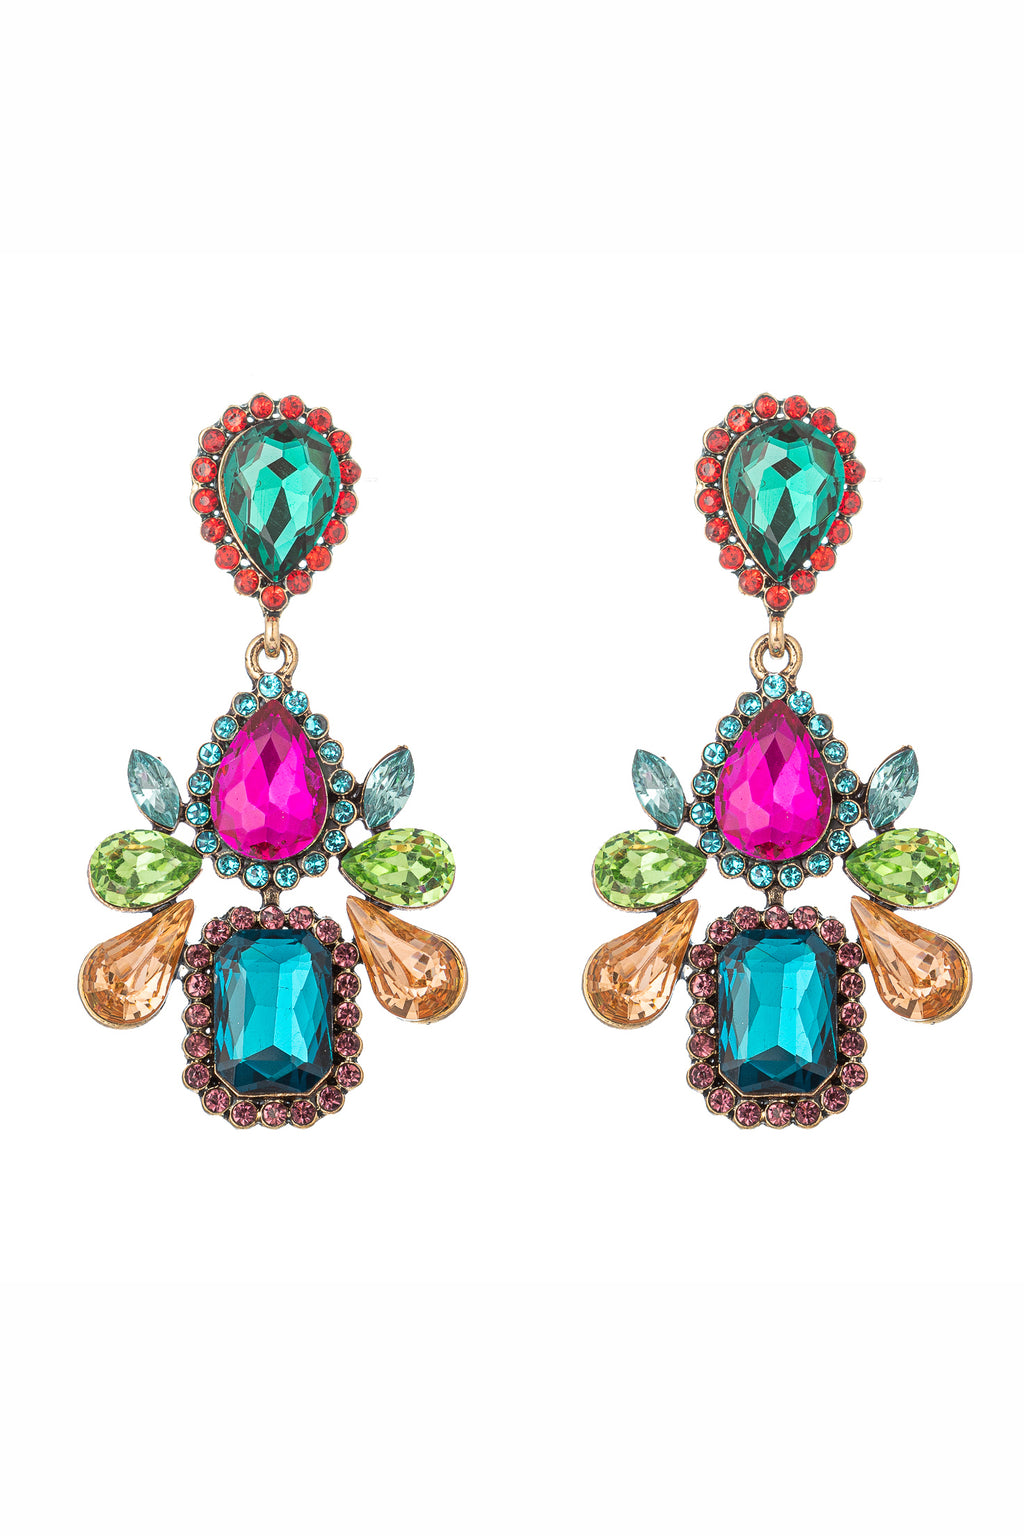 Gold tone alloy dangle statement earrings with multicolored glass crystals.